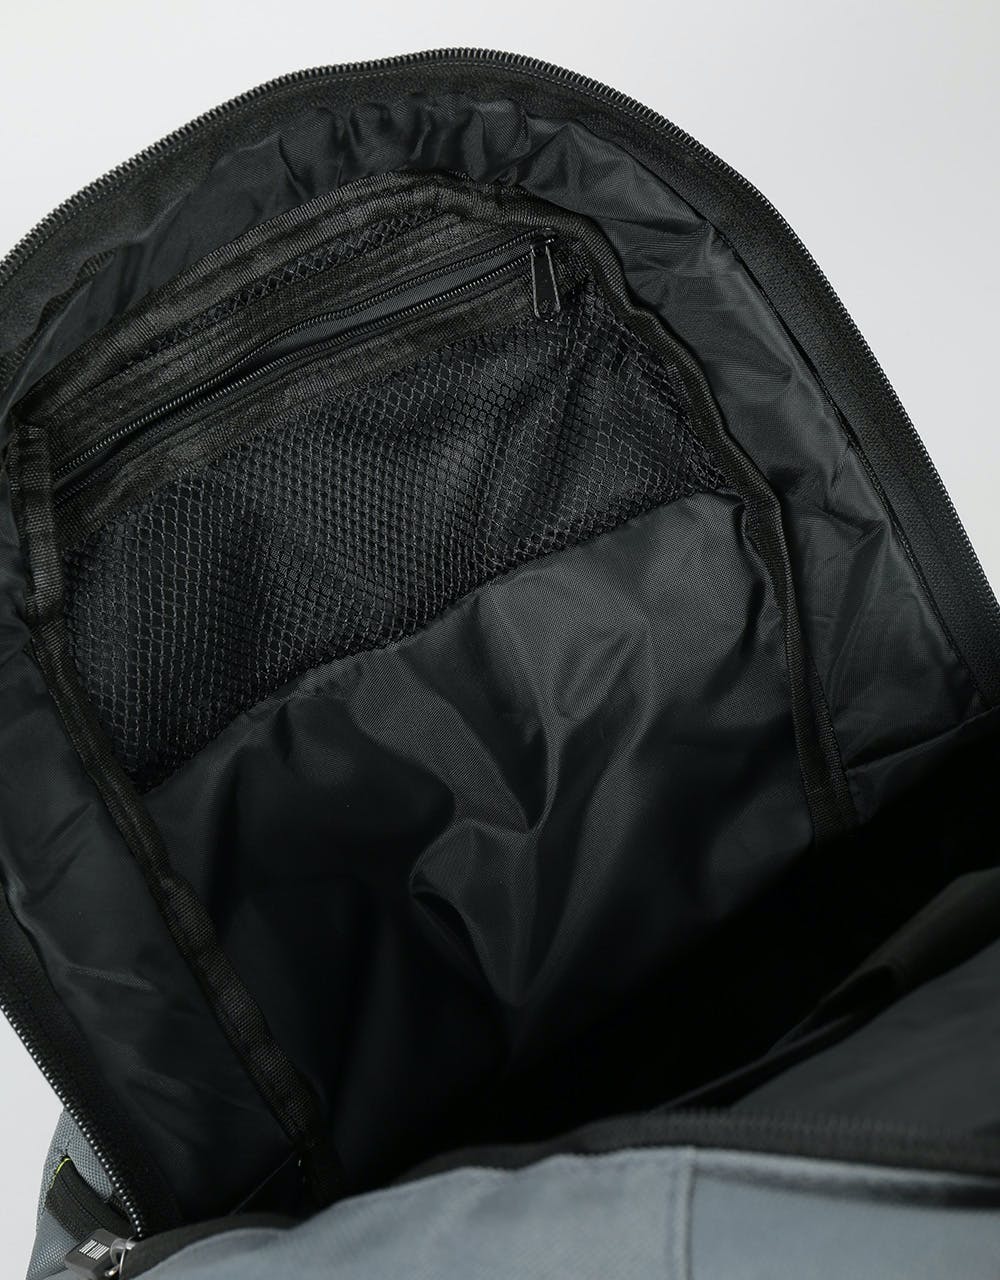 Route One Skatepack - Charcoal